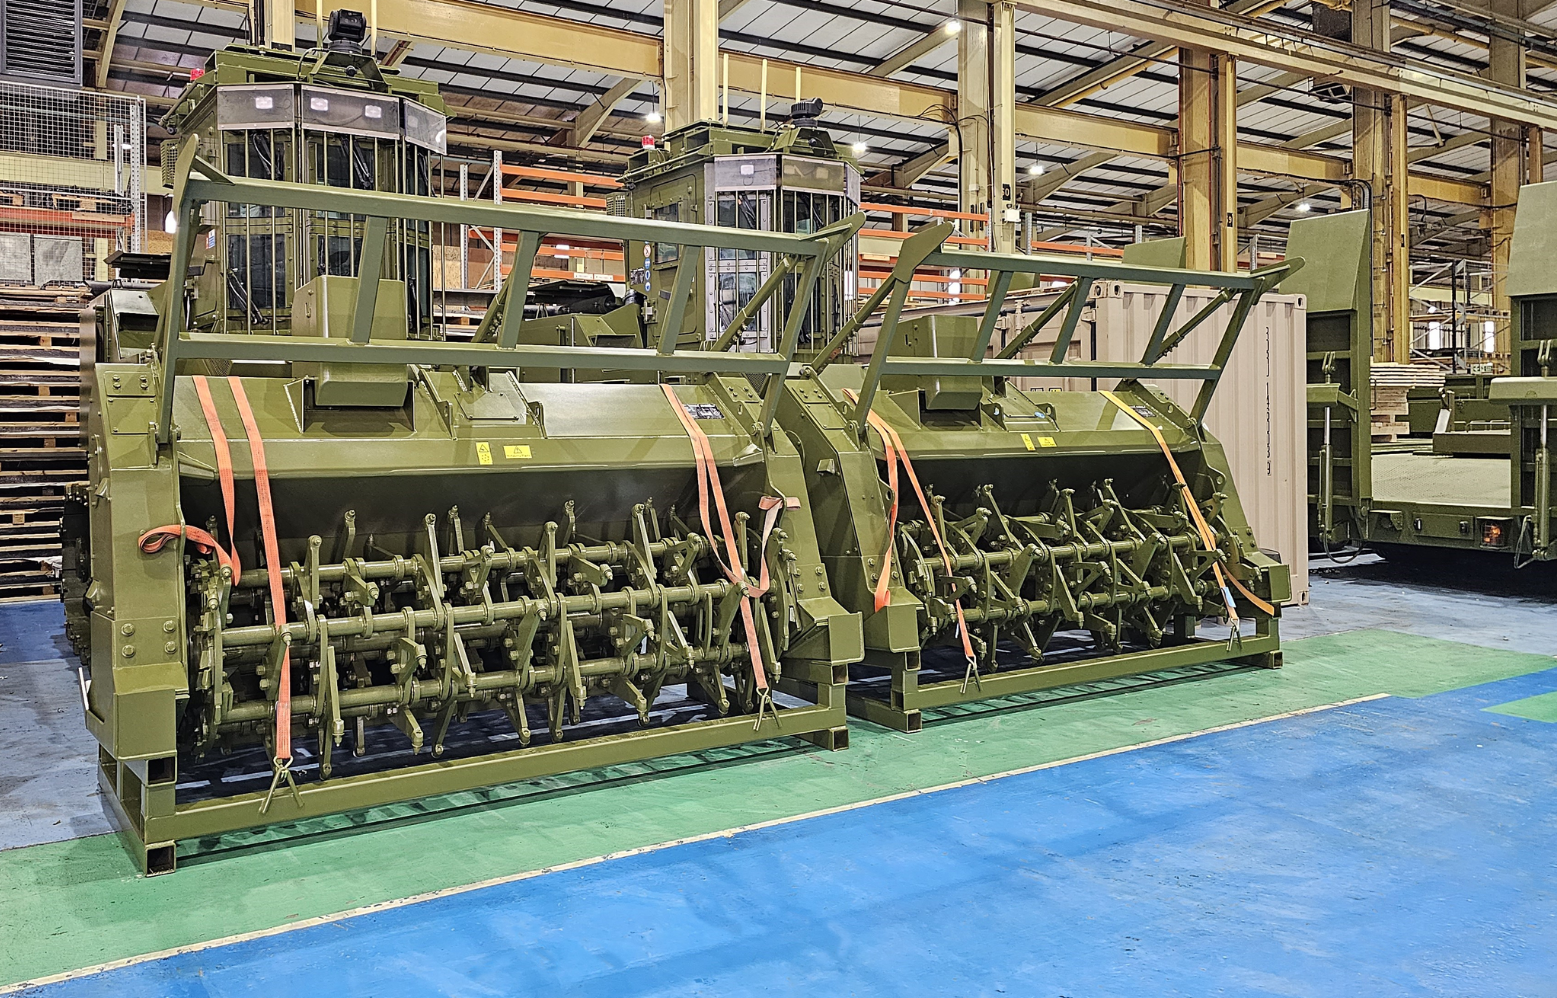 Pearson Engineering Awarded UK MoD to Provide Equipment to Defeat Explosives in Ukraine